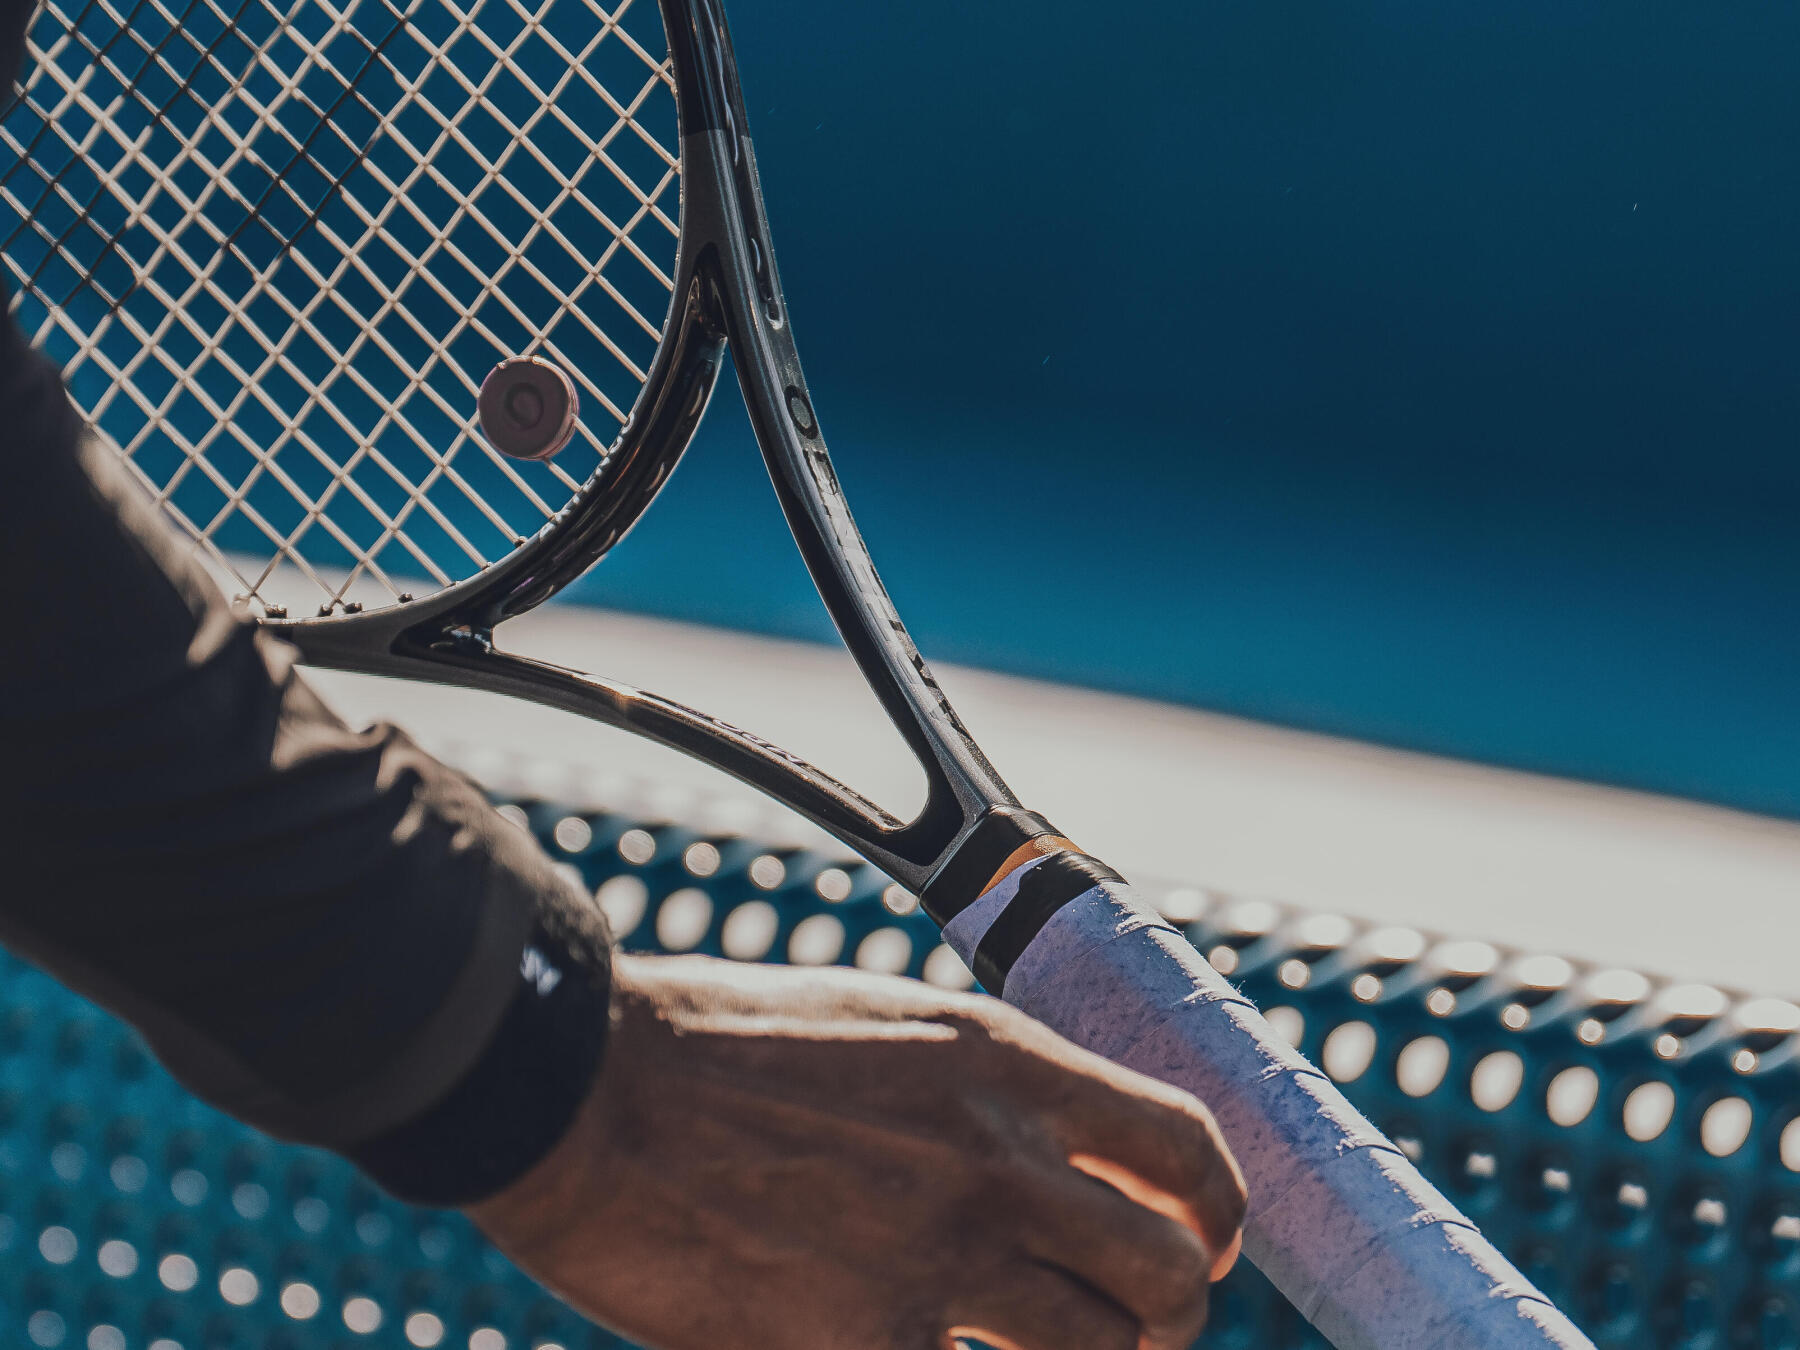 What is the correct string tension for a tennis racket?